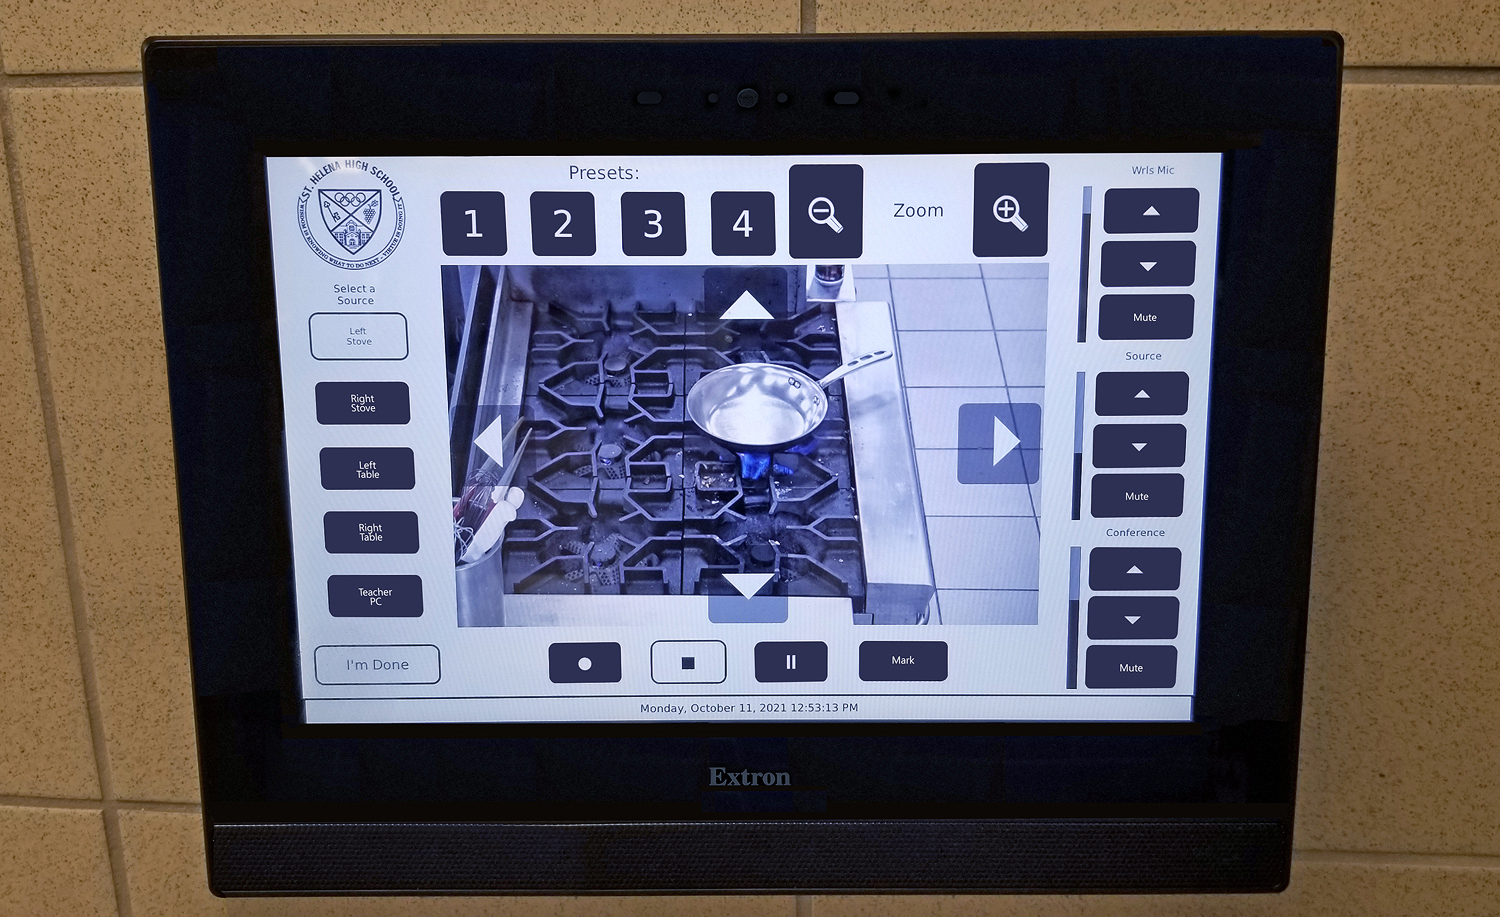 The chef uses the Extron TLP Pro 1225TG 12” Tabletop TouchLink® Pro Touchpanel installed next to his computer to control the AV system, including selecting among the camera presets.